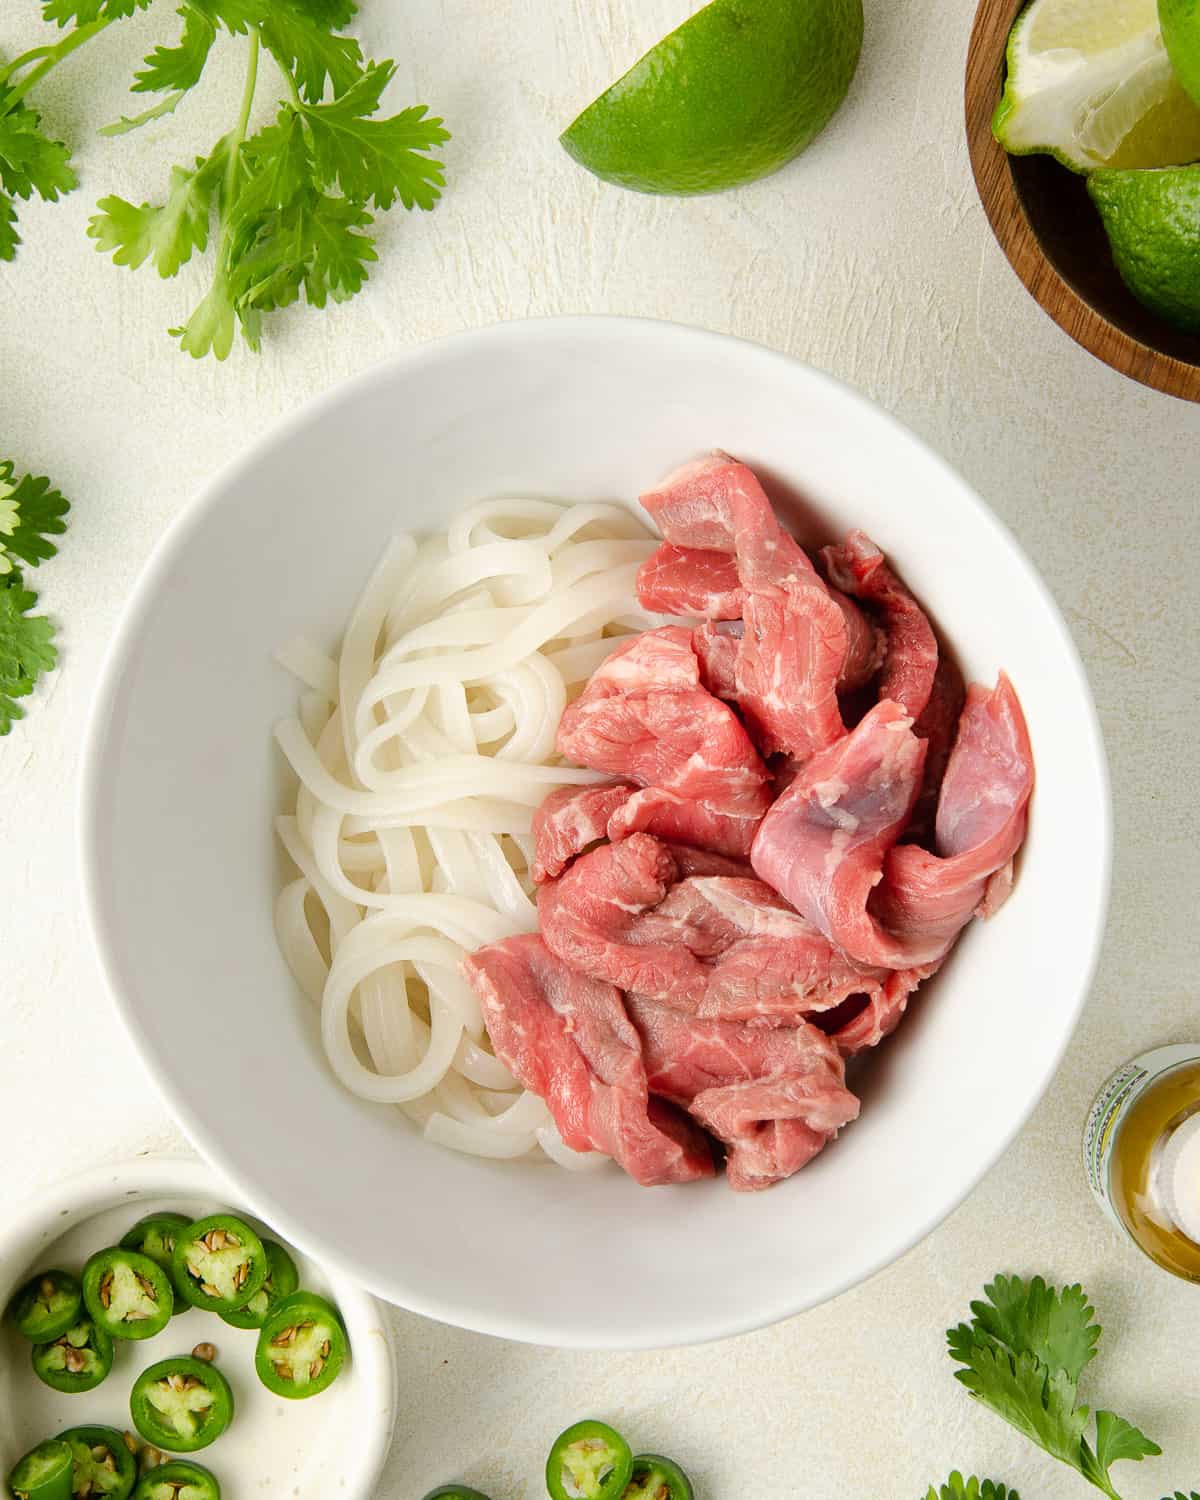 Place steak on top of the rice noodles to get ready to cook the steak.